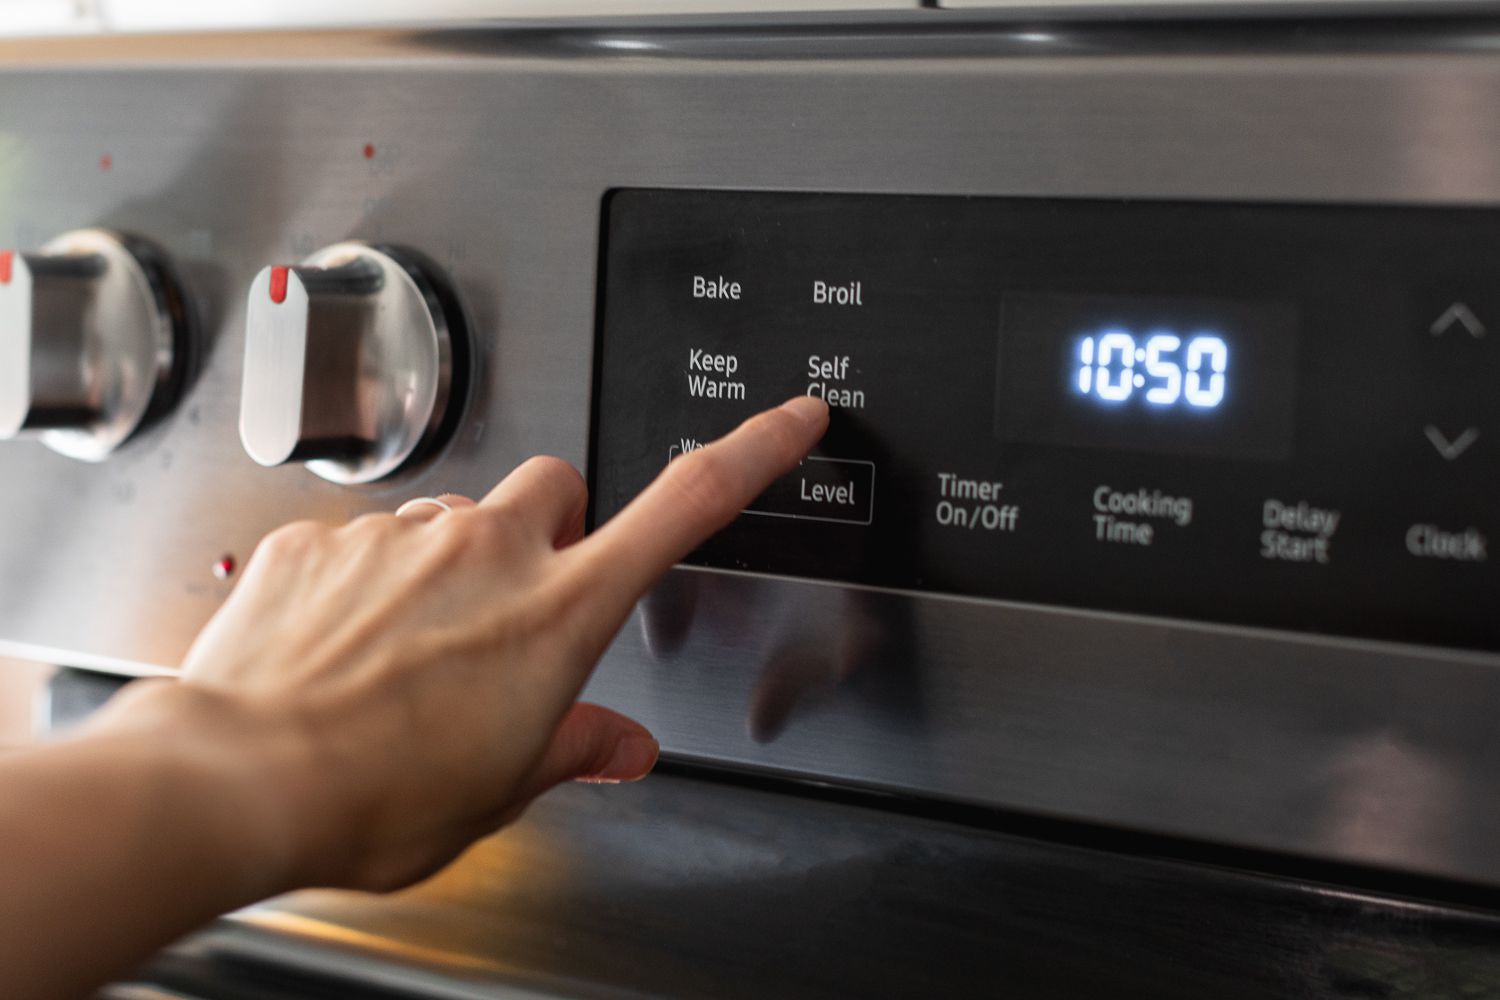 Self-clean cycle button pressed on oven